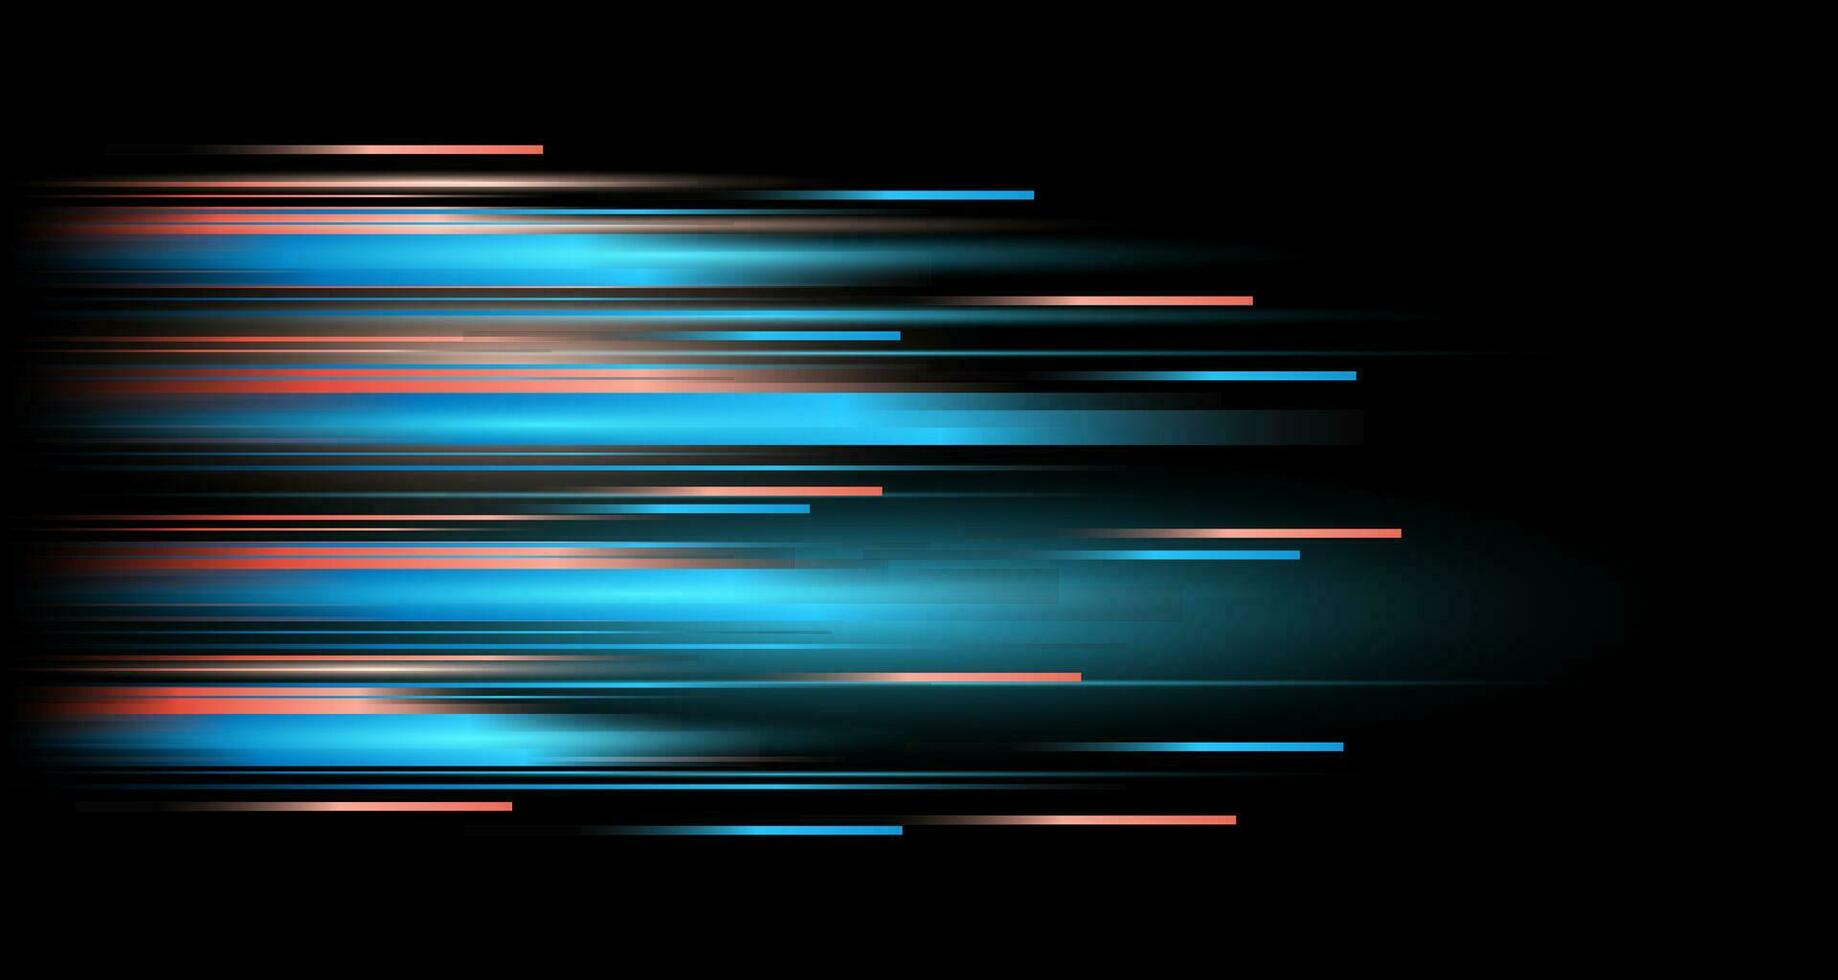 Abstract Background With Glowing Horizontal Lines. Illustration Light Render Of Digital Technology vector